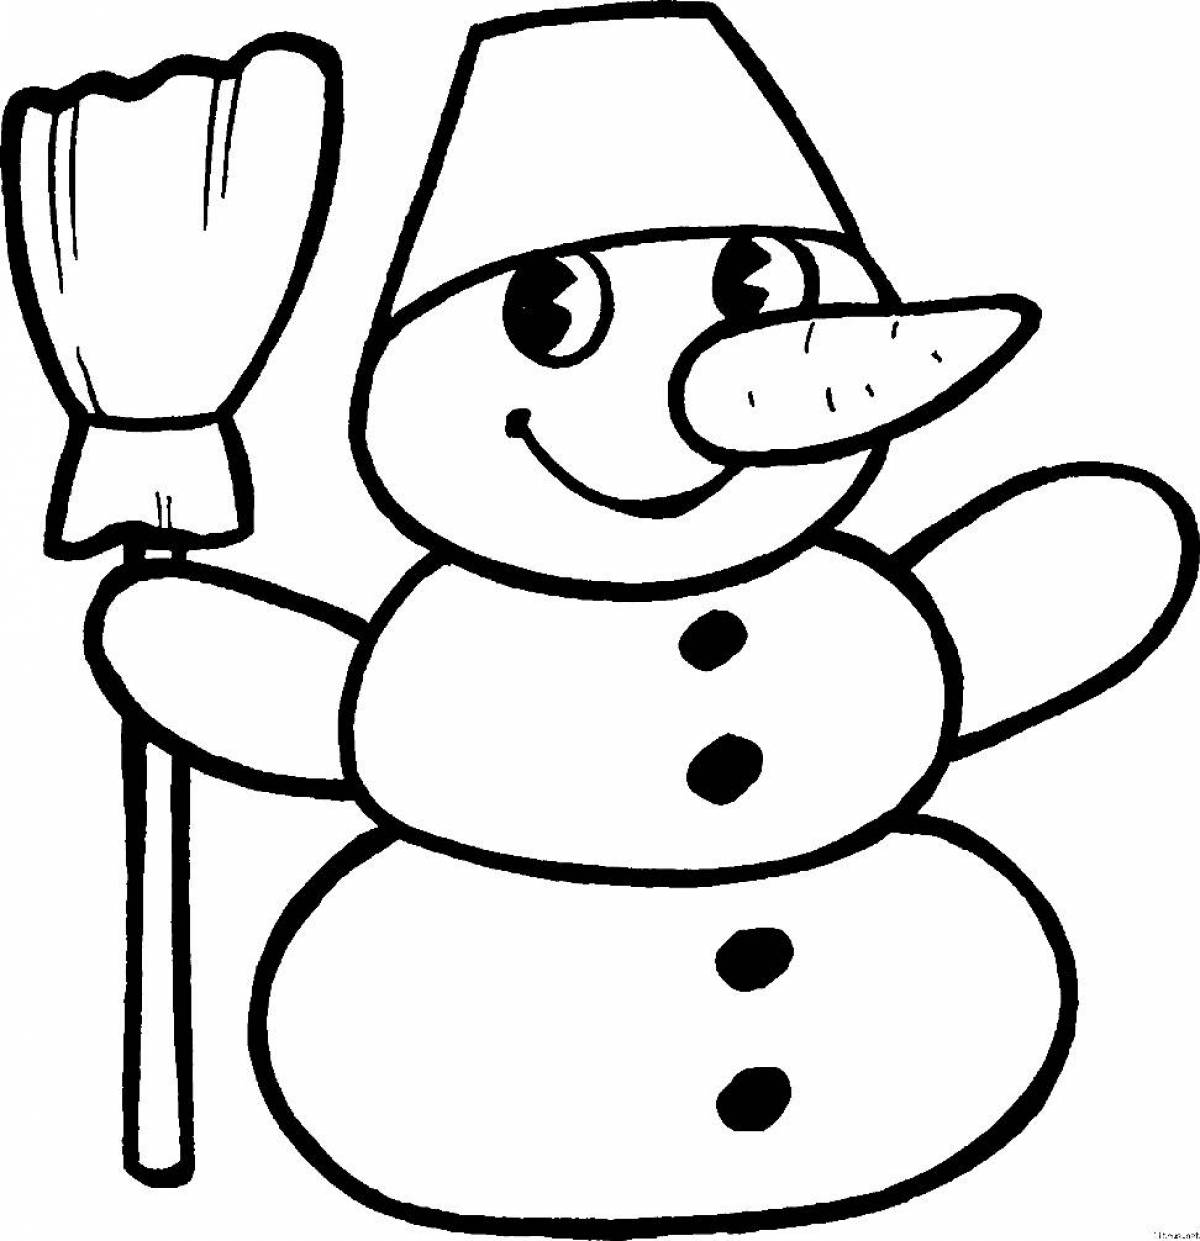 Live snowman coloring for kids